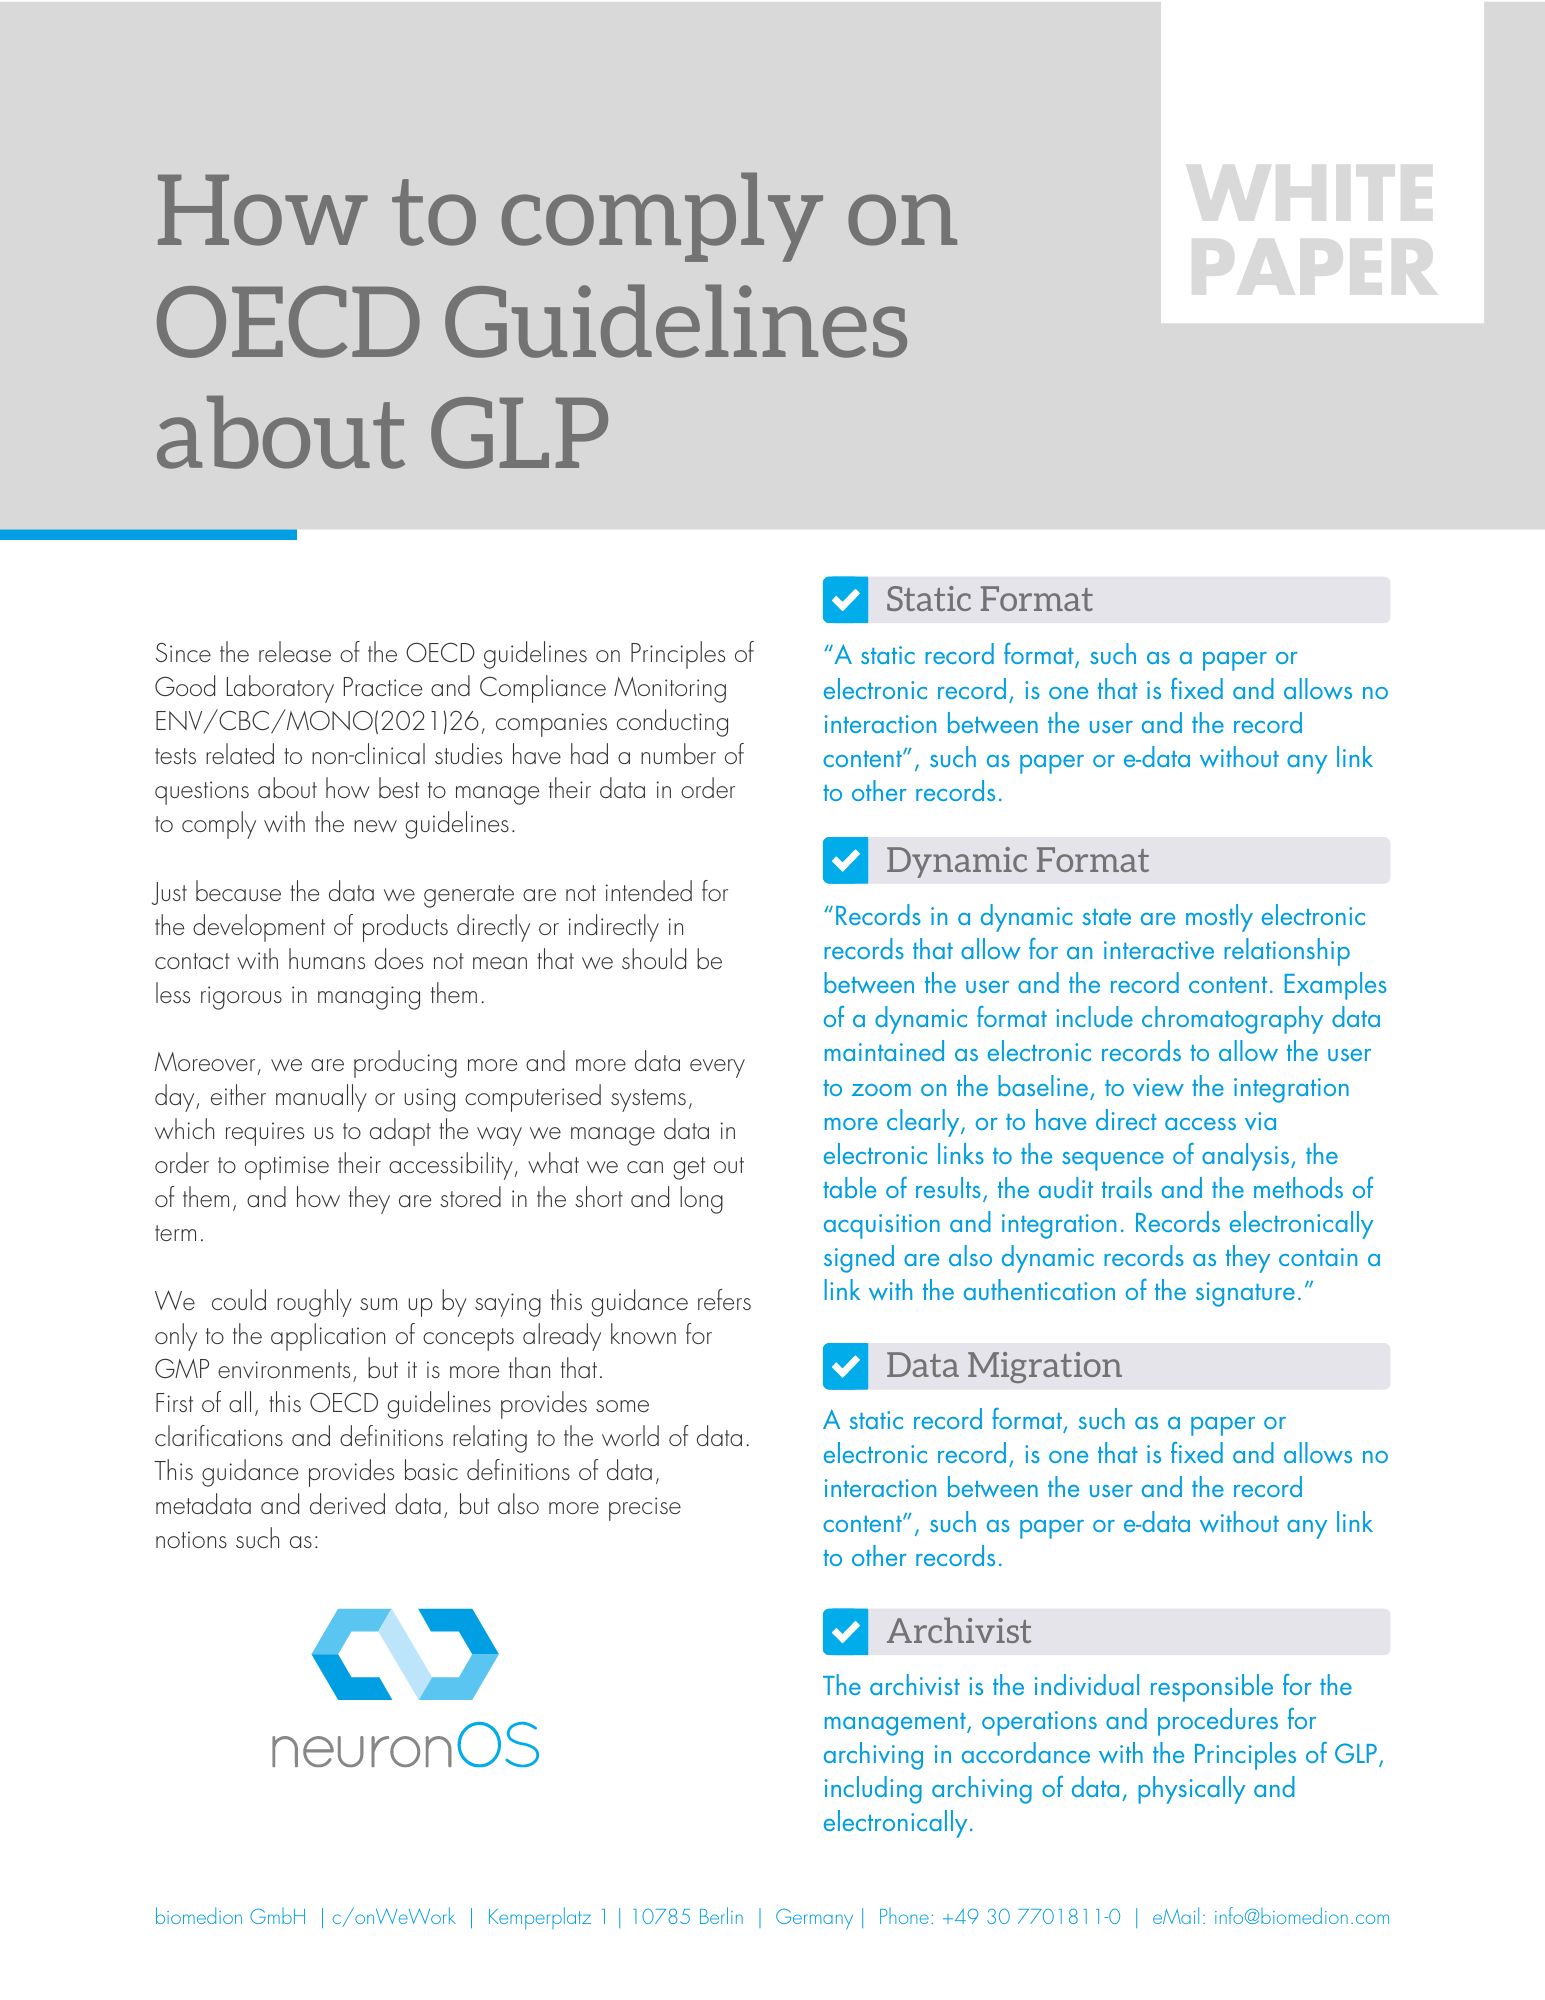 Whitepaper_How to comply with OECD Guidelines about GLP 2024 (1)